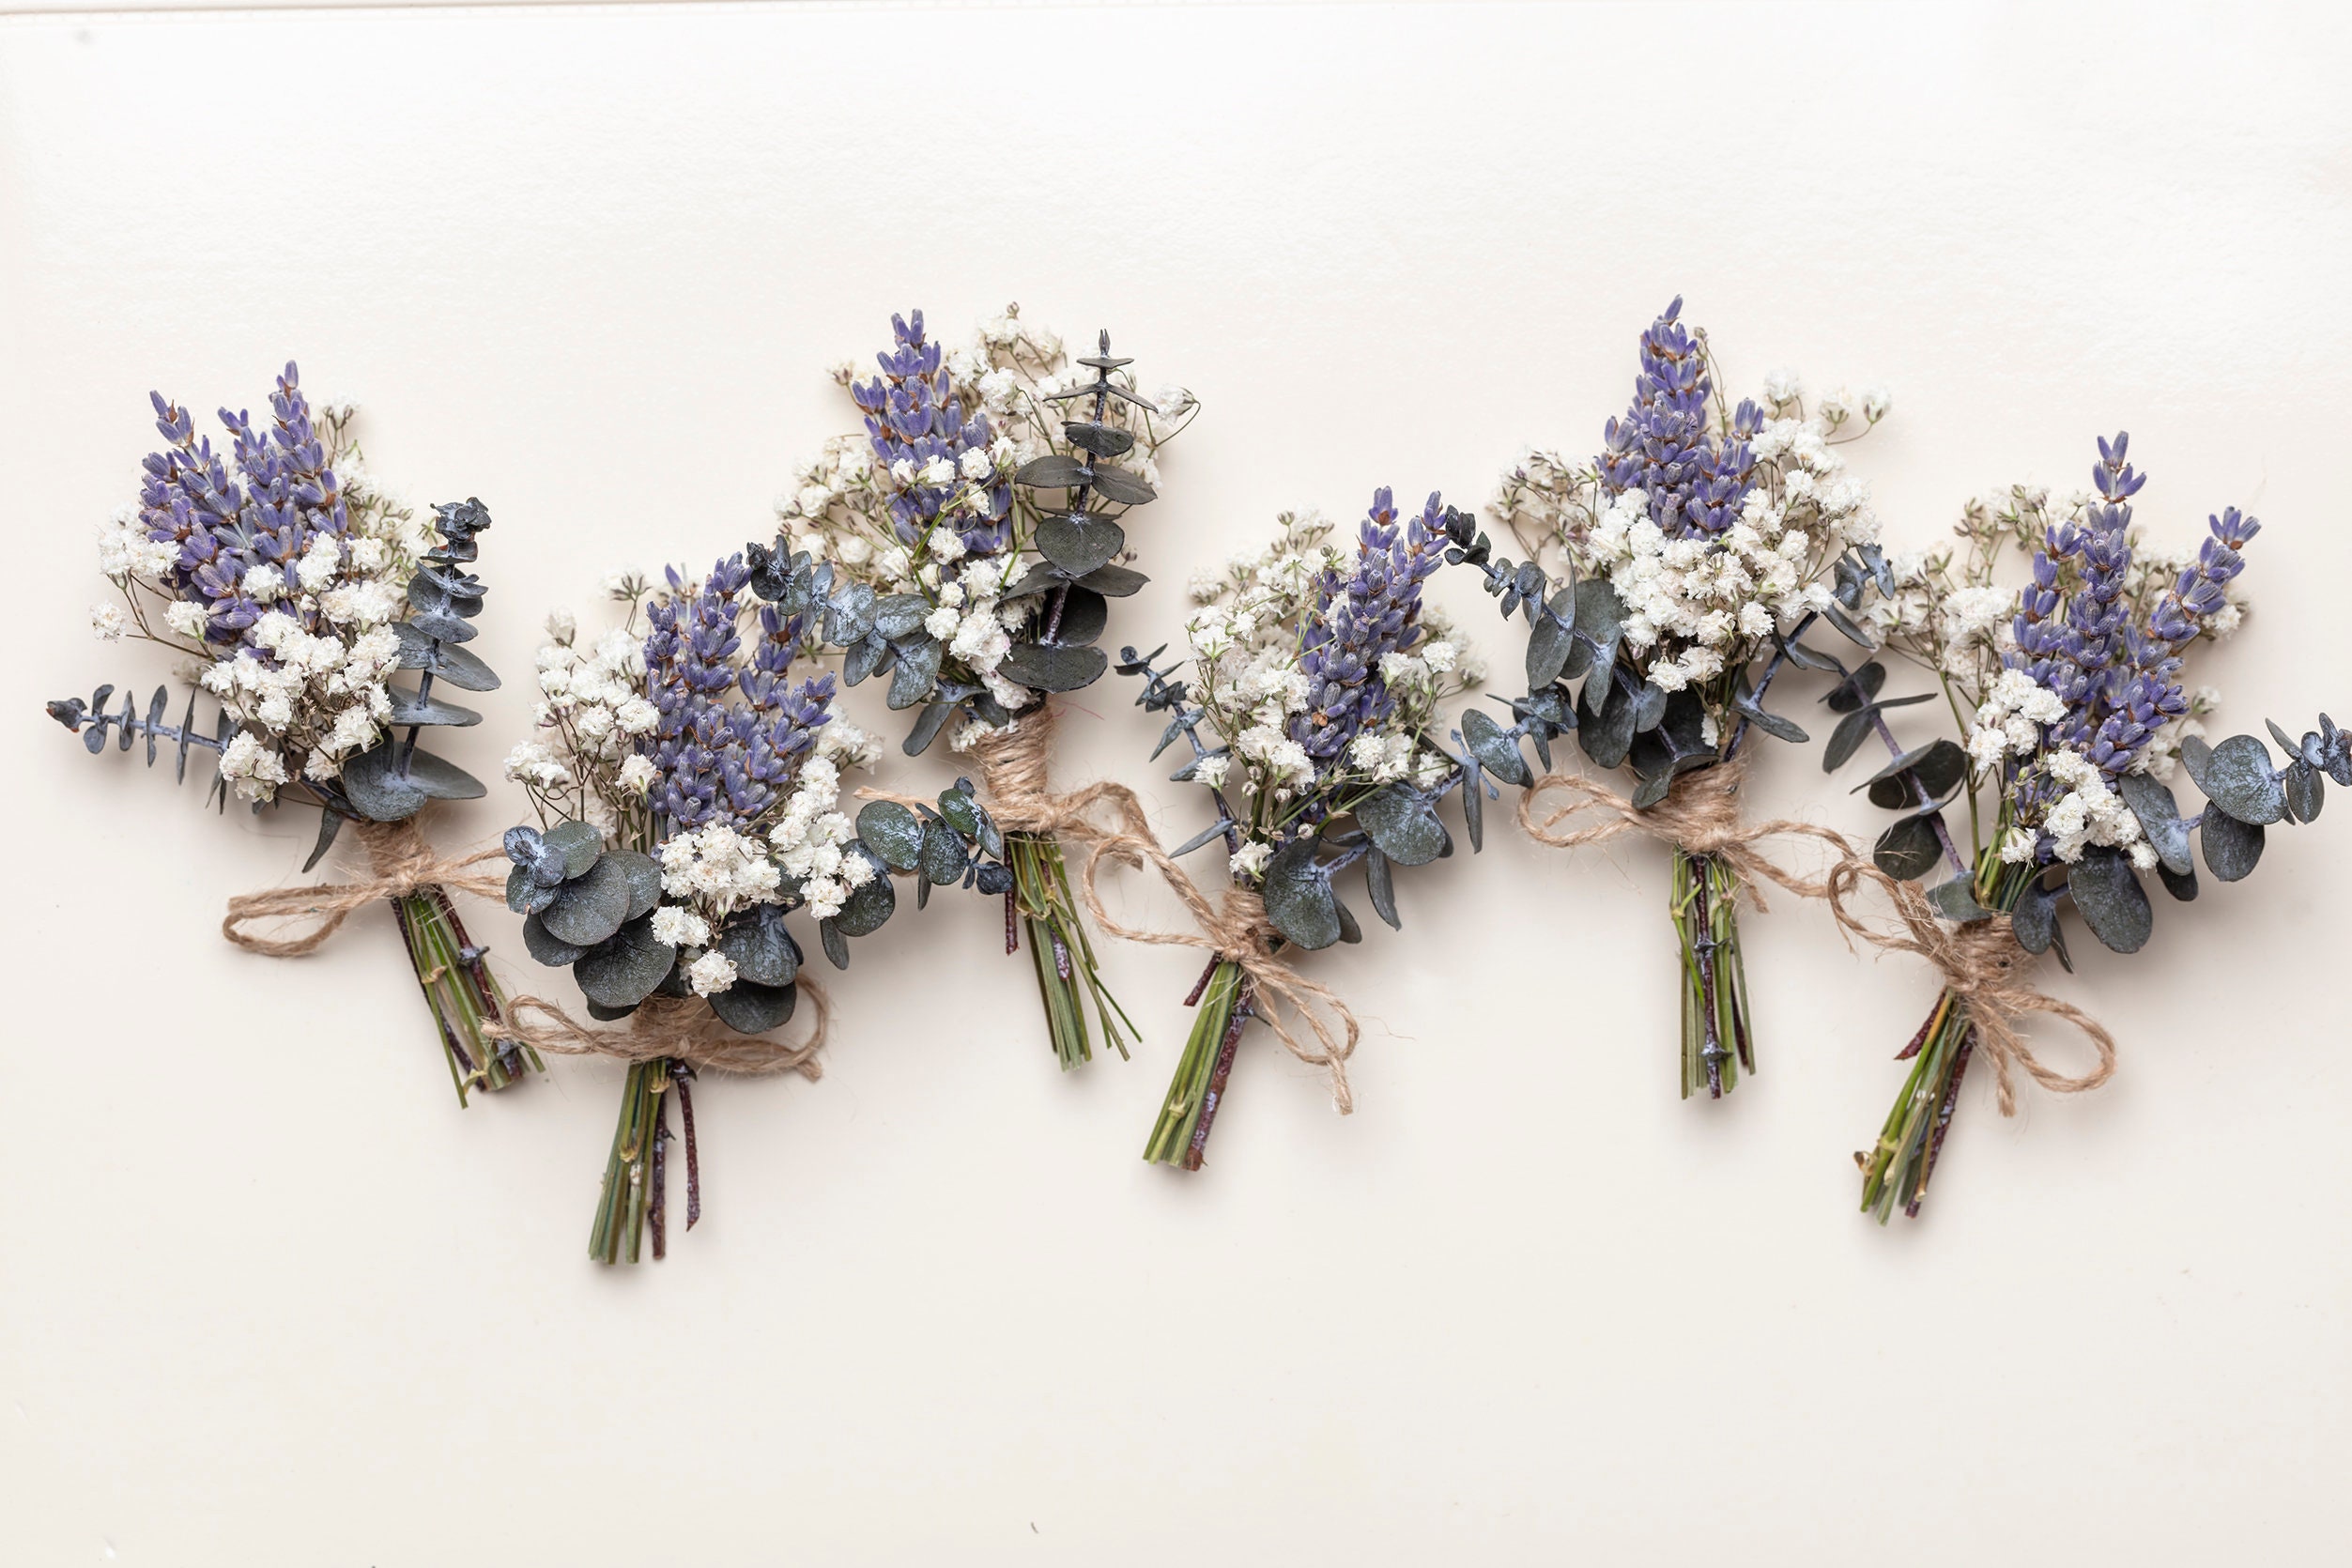 Bouquet of dry lavender flowers and sachets filled with dried lavender  Stock Photo by ©ChamilleWhite 140011974